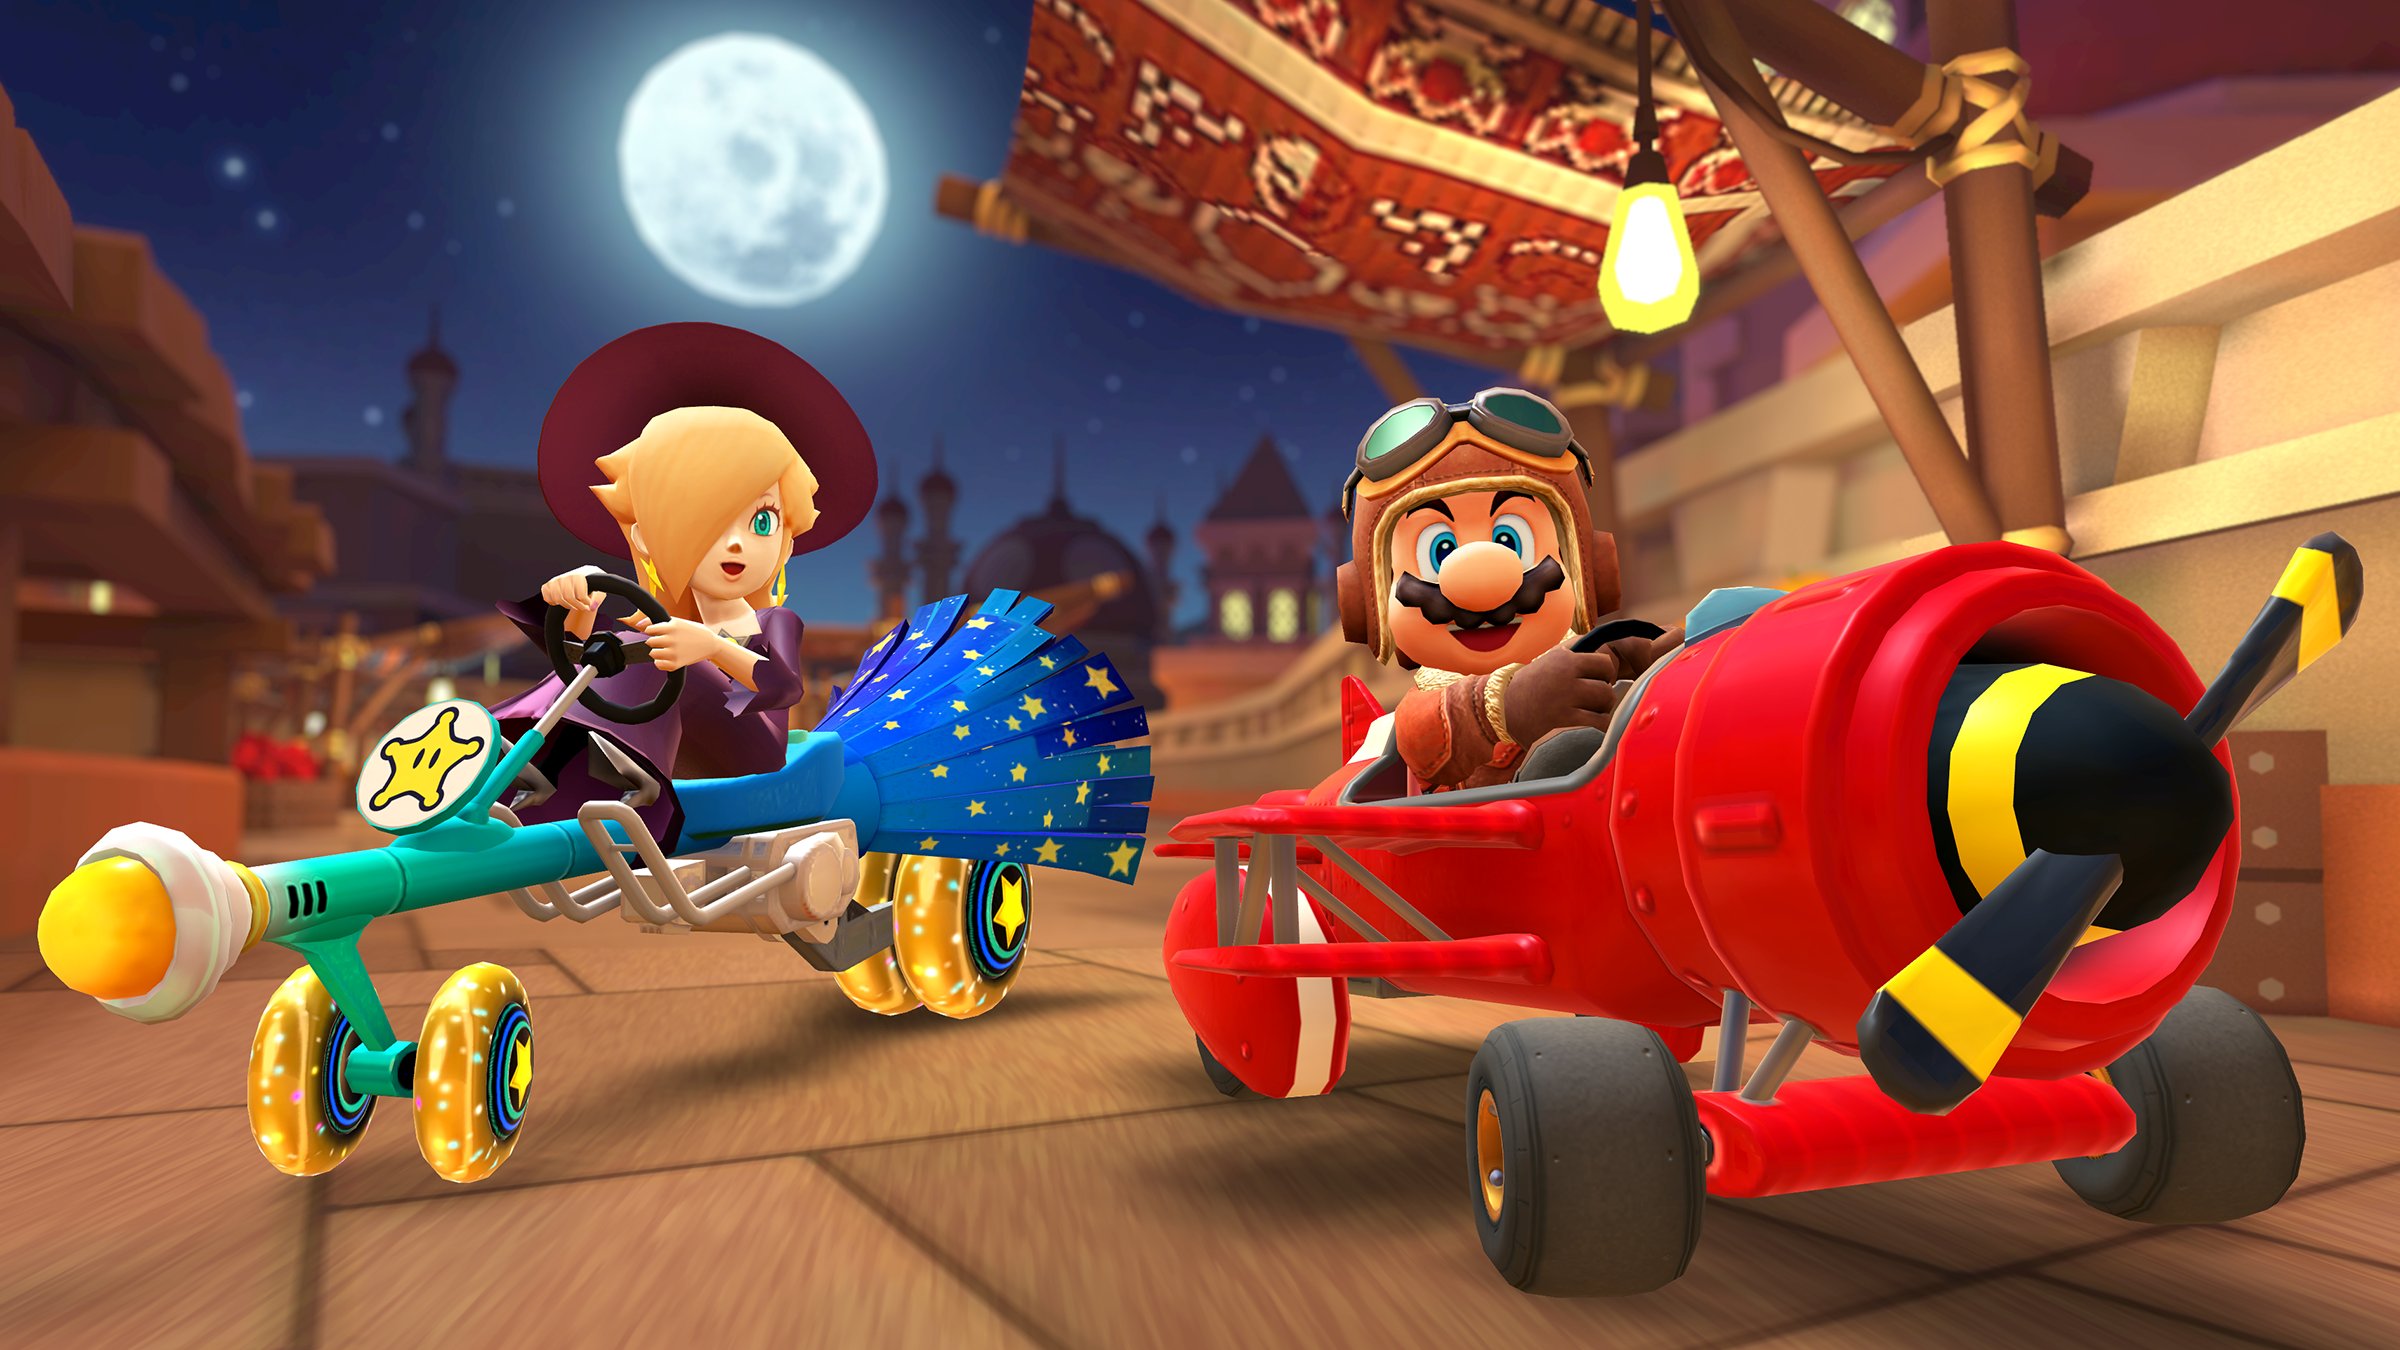 Mario Kart Tour on X: We're in the second half of the Team Rally in # MarioKartTour! Mario (Aviator) from Team Peach and Rosalina (Halloween)  from Team Bowser make a comeback!  /